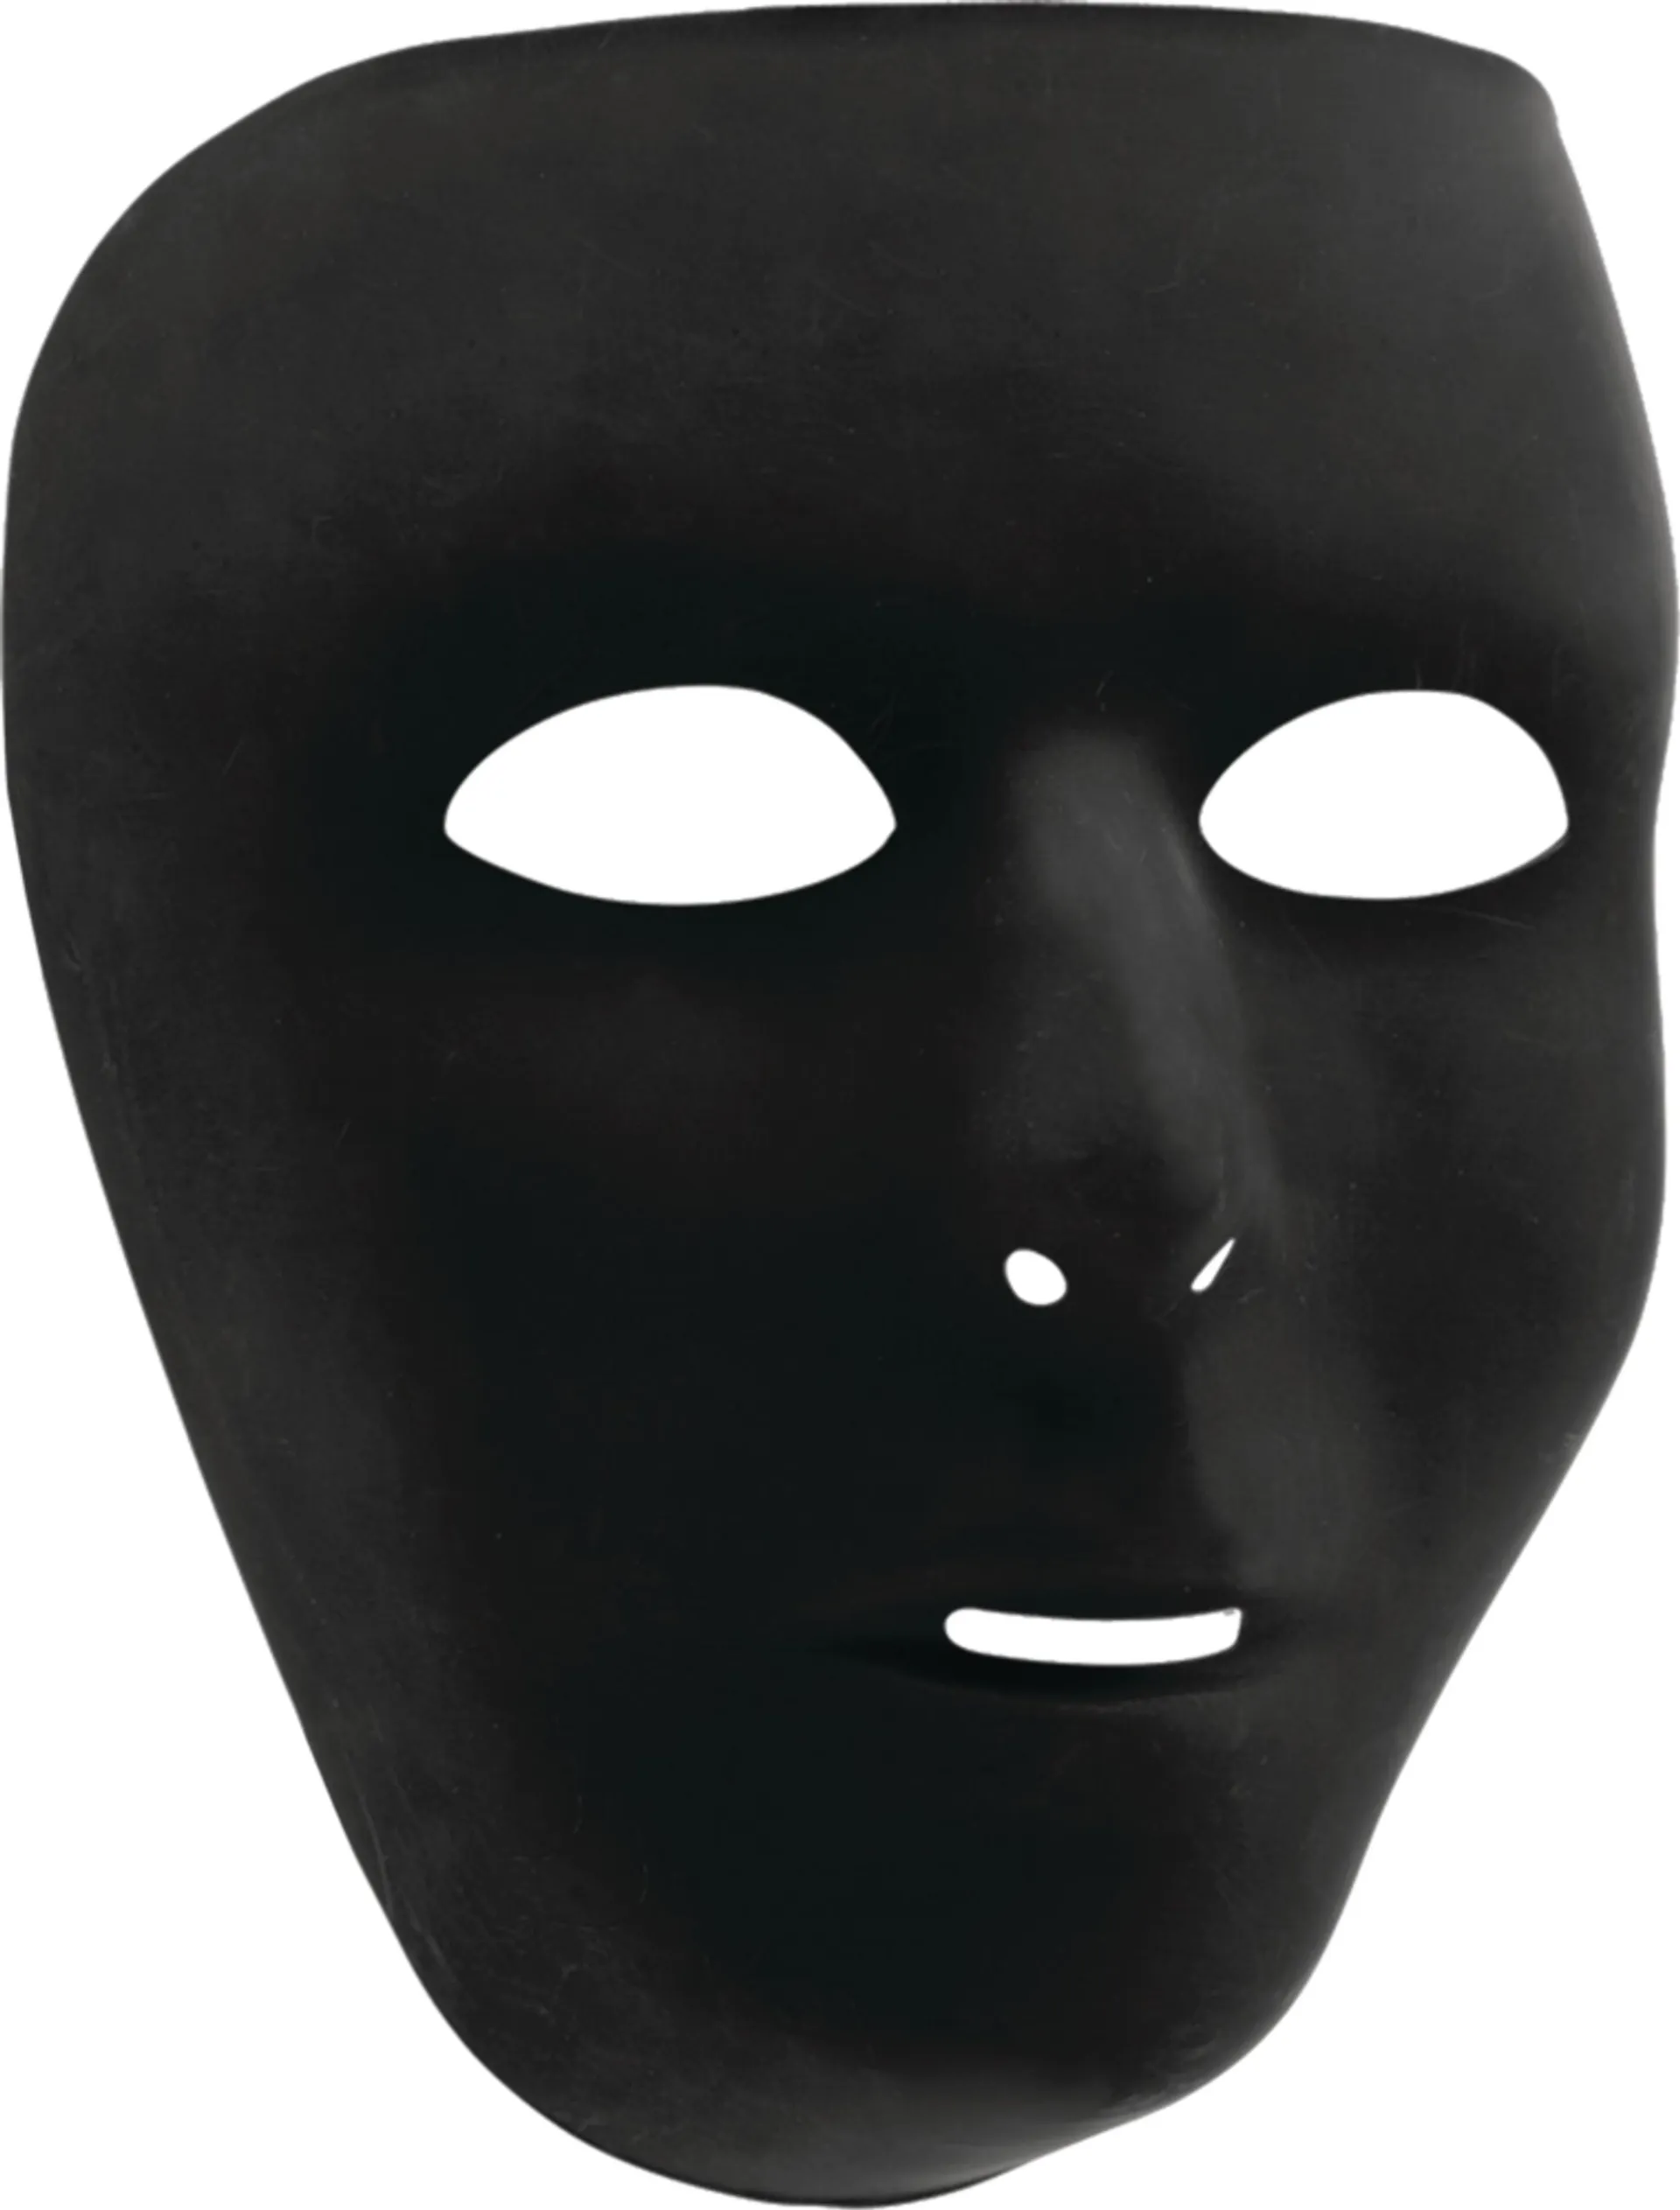 Basic Full Face Mask, Assorted Colours, One Size, Wearable Costume Accessory for Halloween